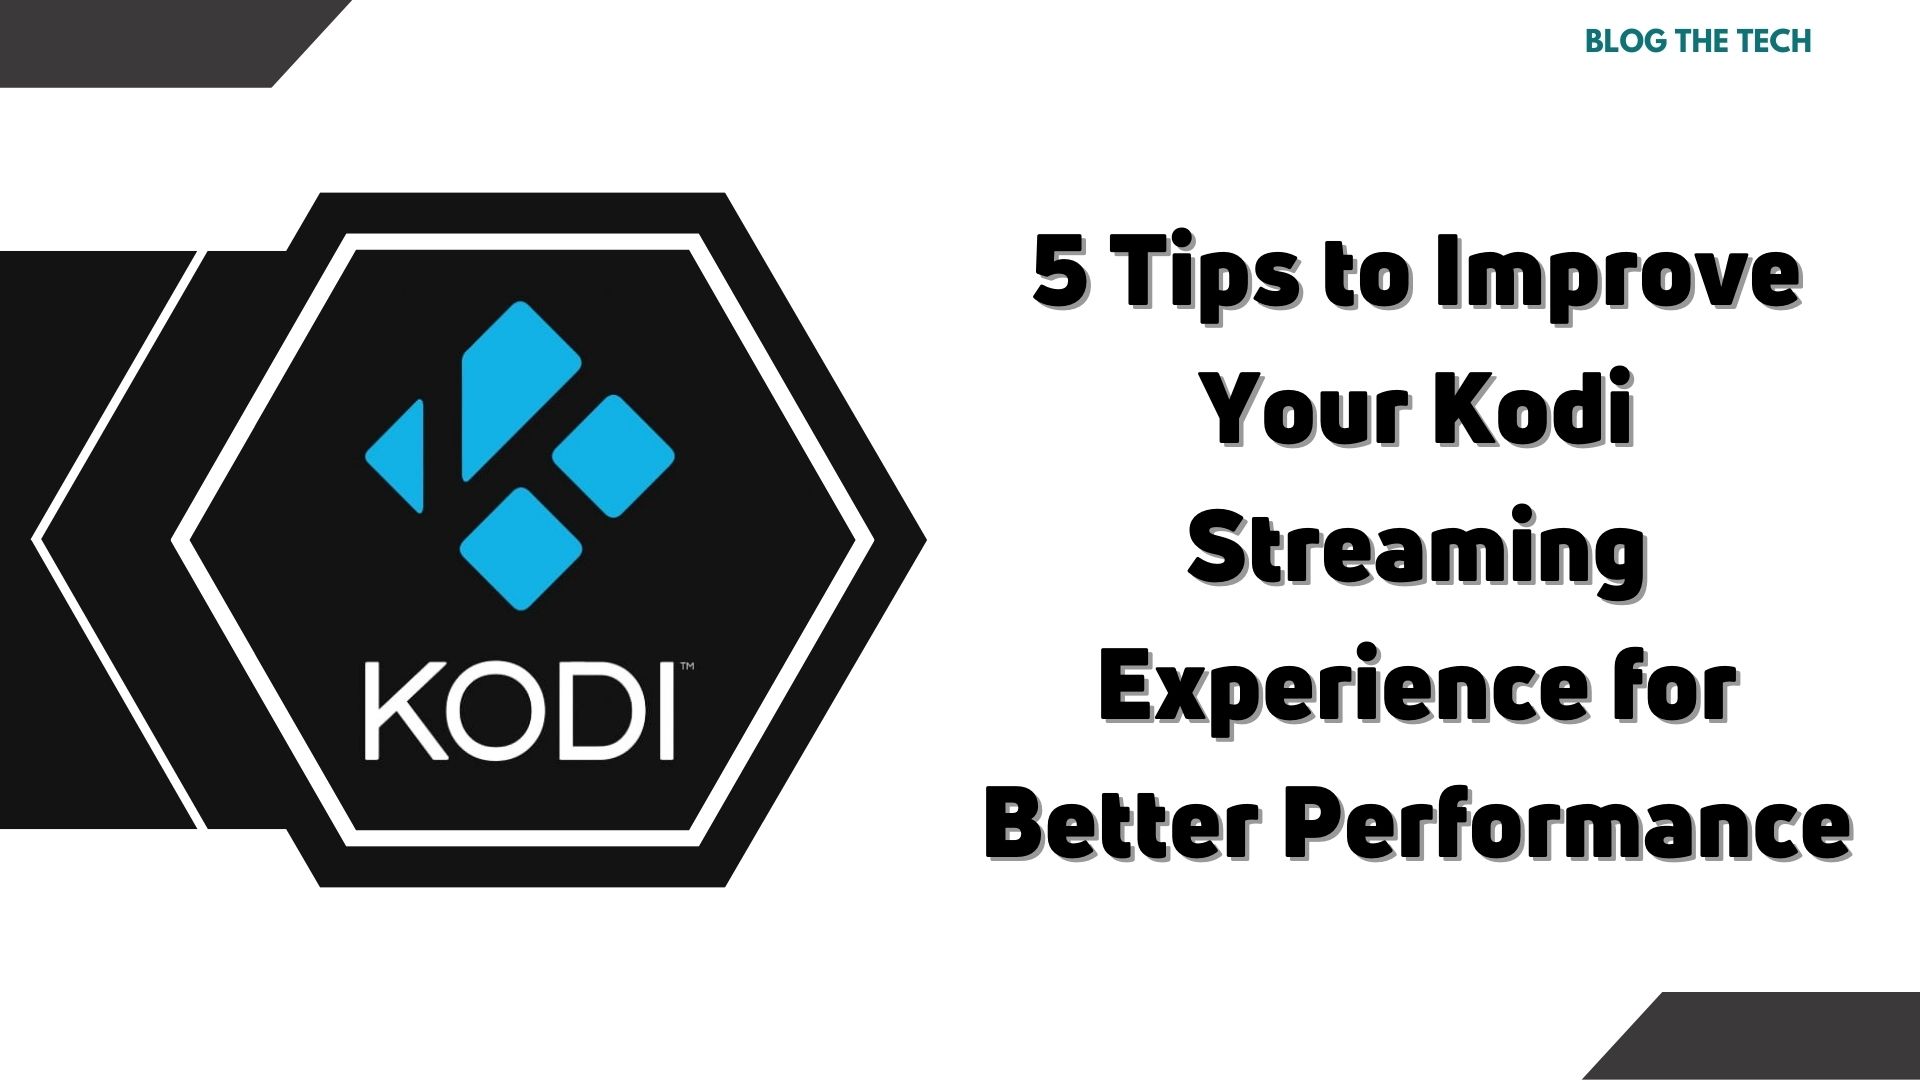 5 Tips to Improve Your Kodi Streaming Experience for Better Performance